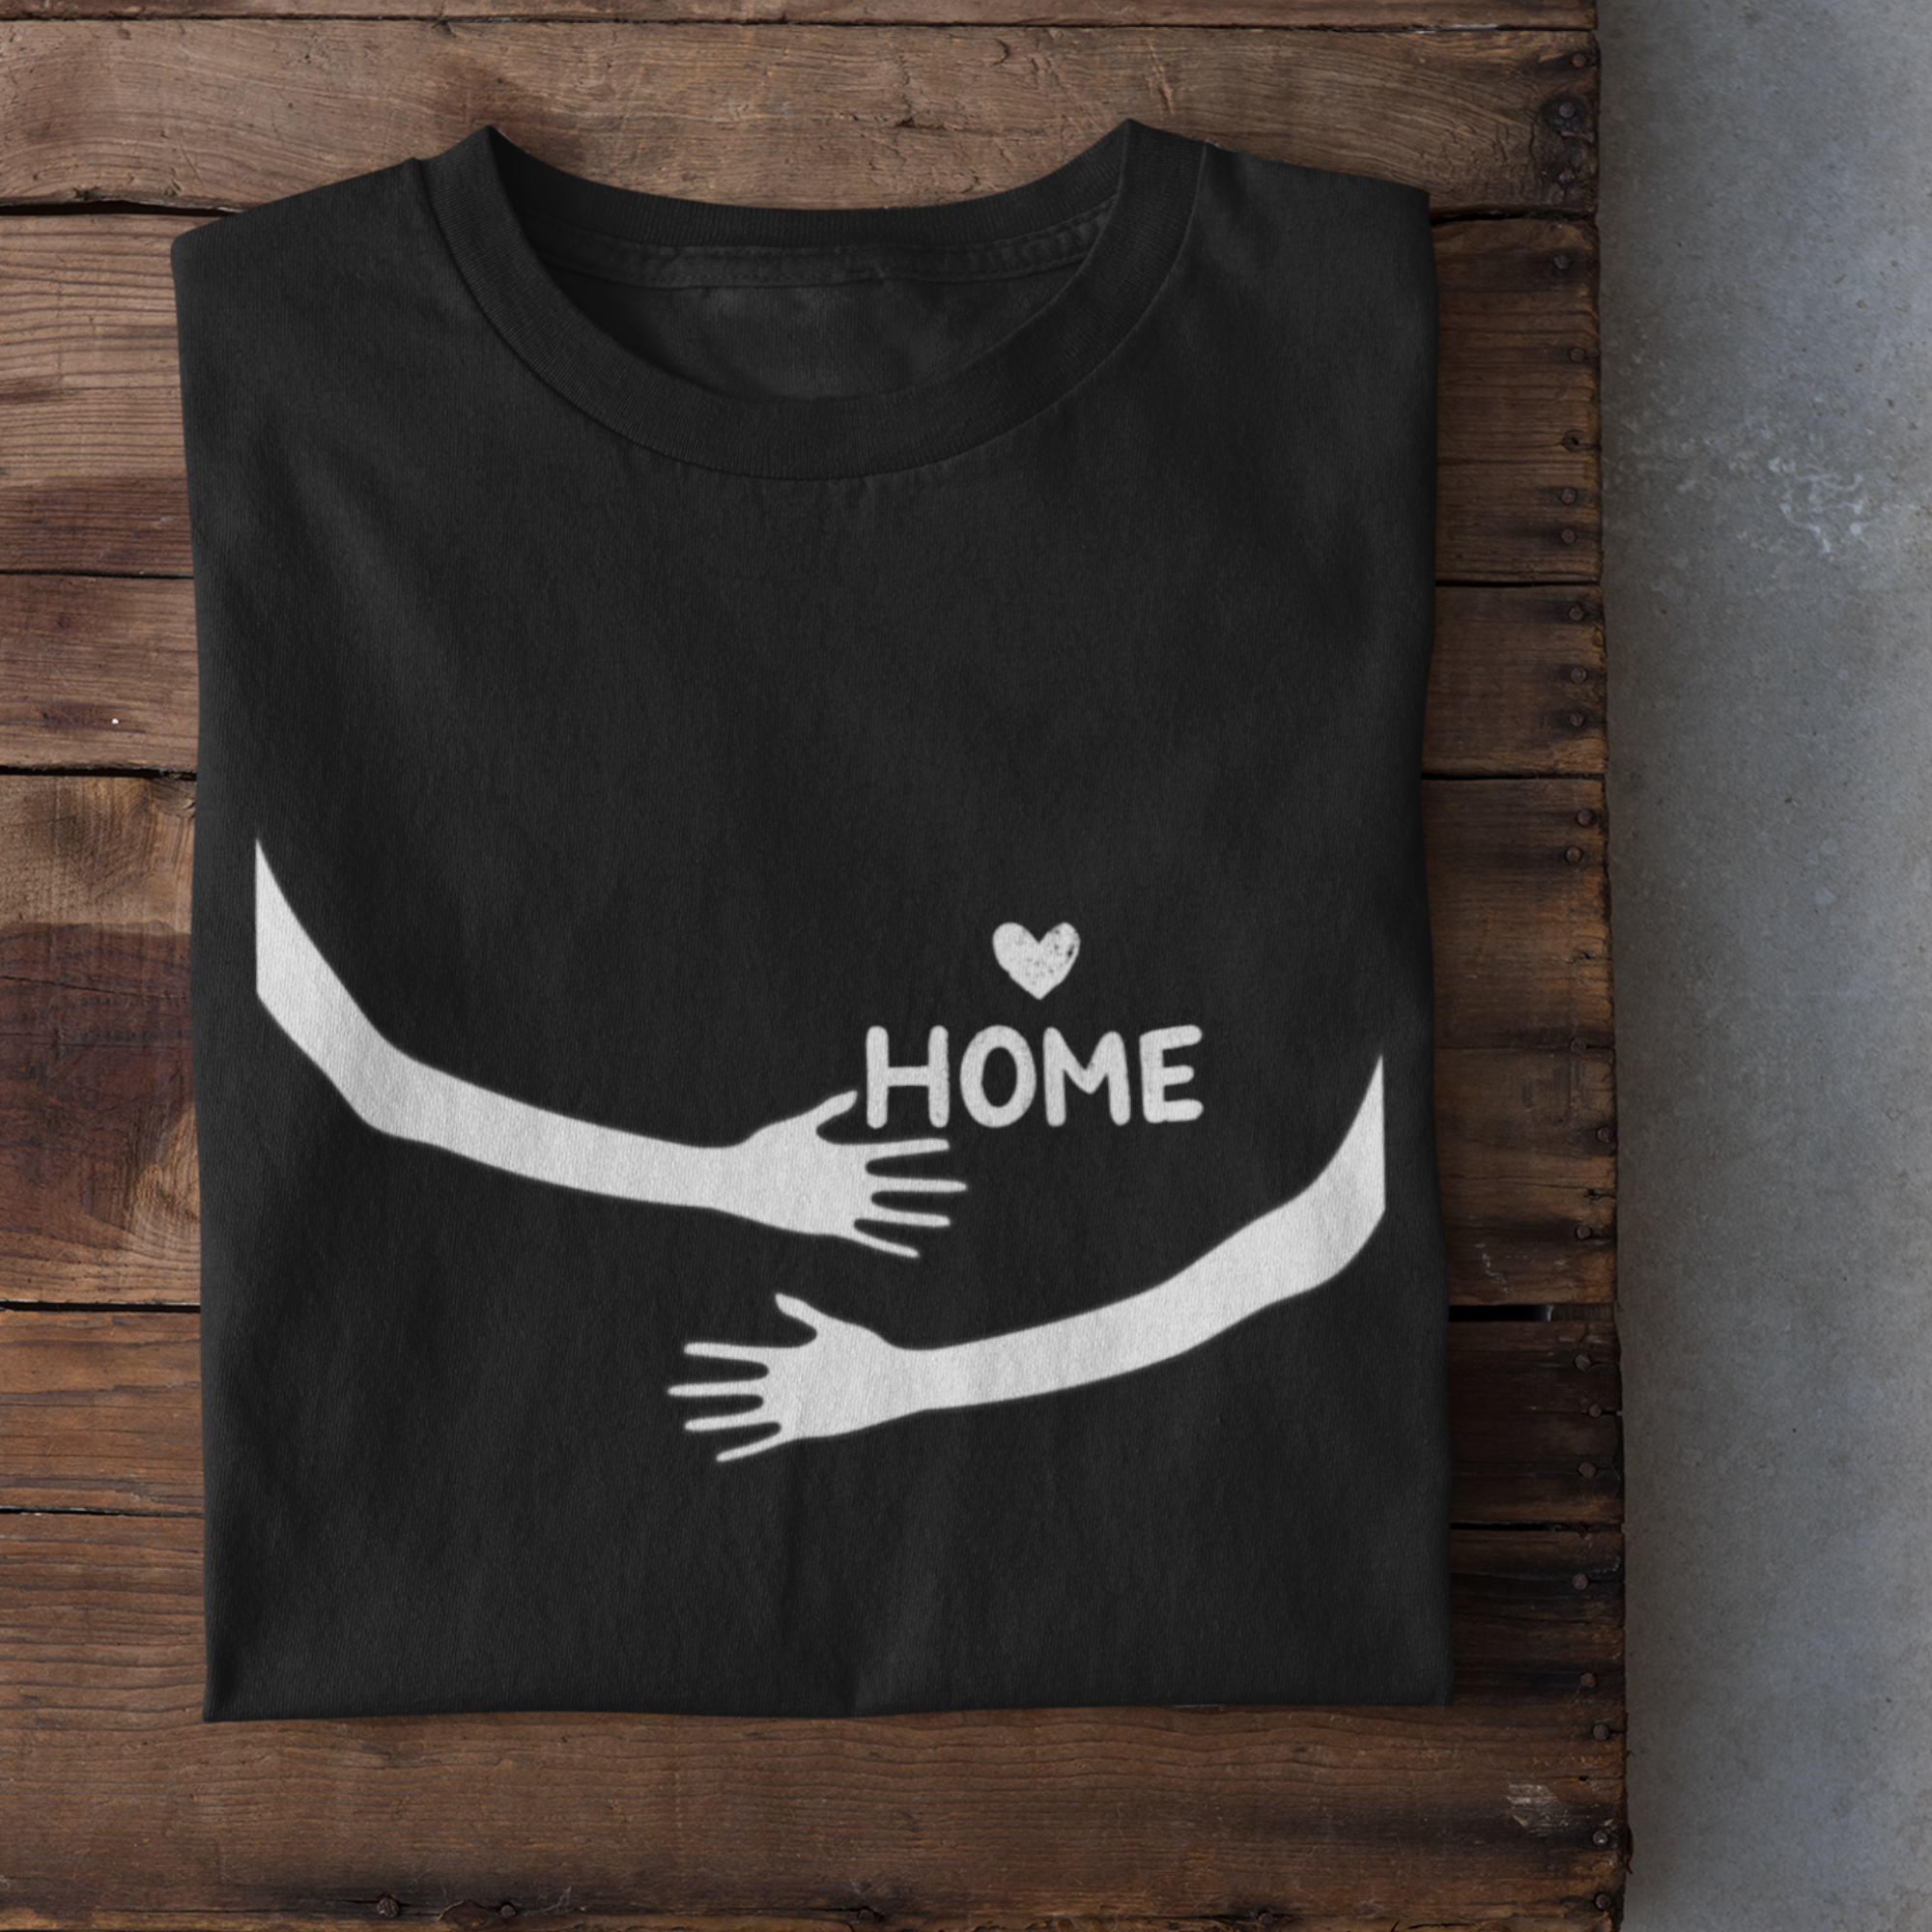 My home: Your arms | Premium Unisex Half Sleeve T-shirt